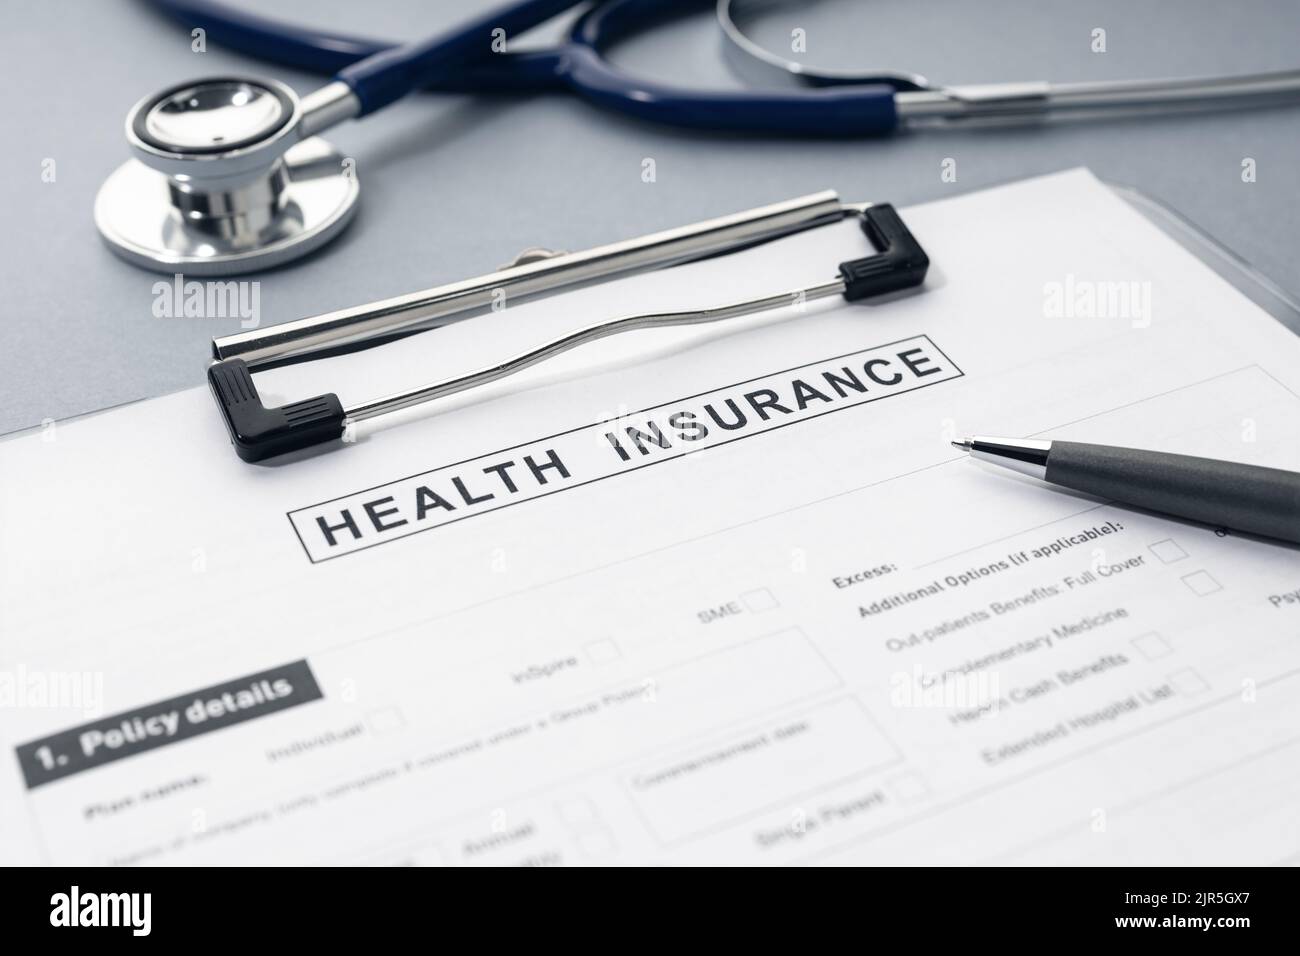 Health Insurance form and stethoscope on desk Stock Photo